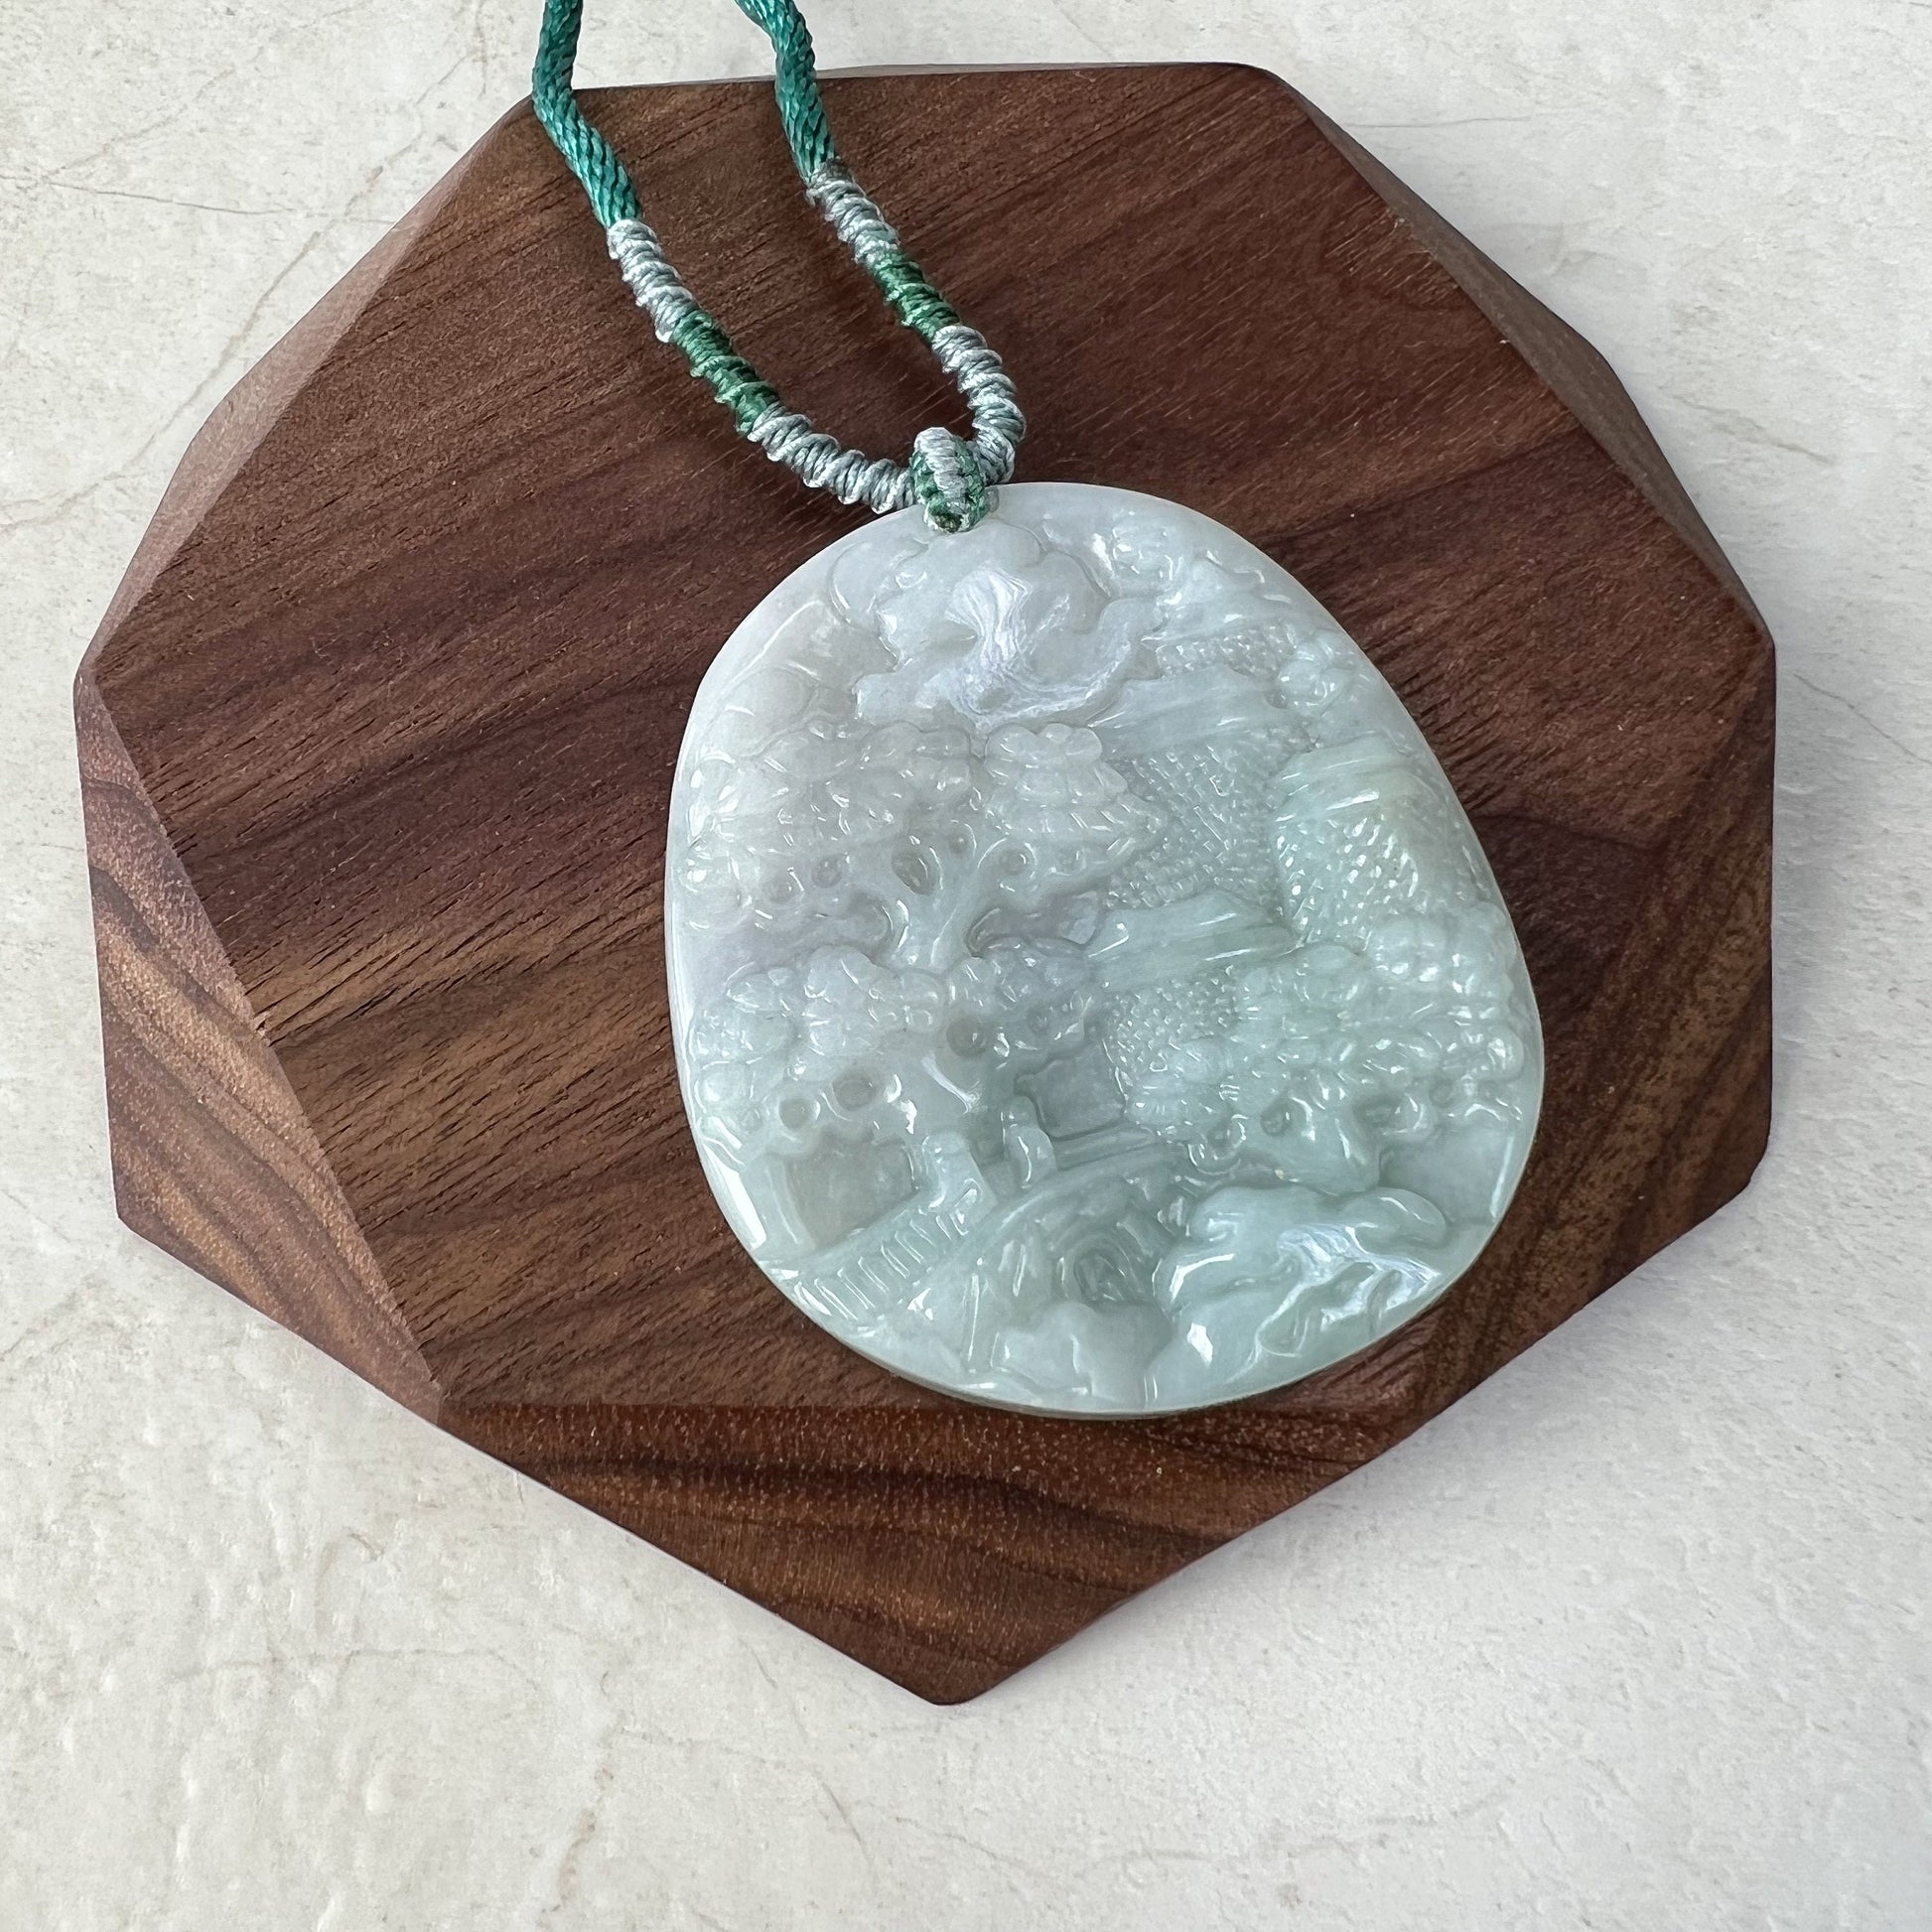 Jadeite Jade Landscape Mountain Forest River Scenery Hand Carved Pendant Necklace, YJ-0921-0166733 - AriaDesignCollection